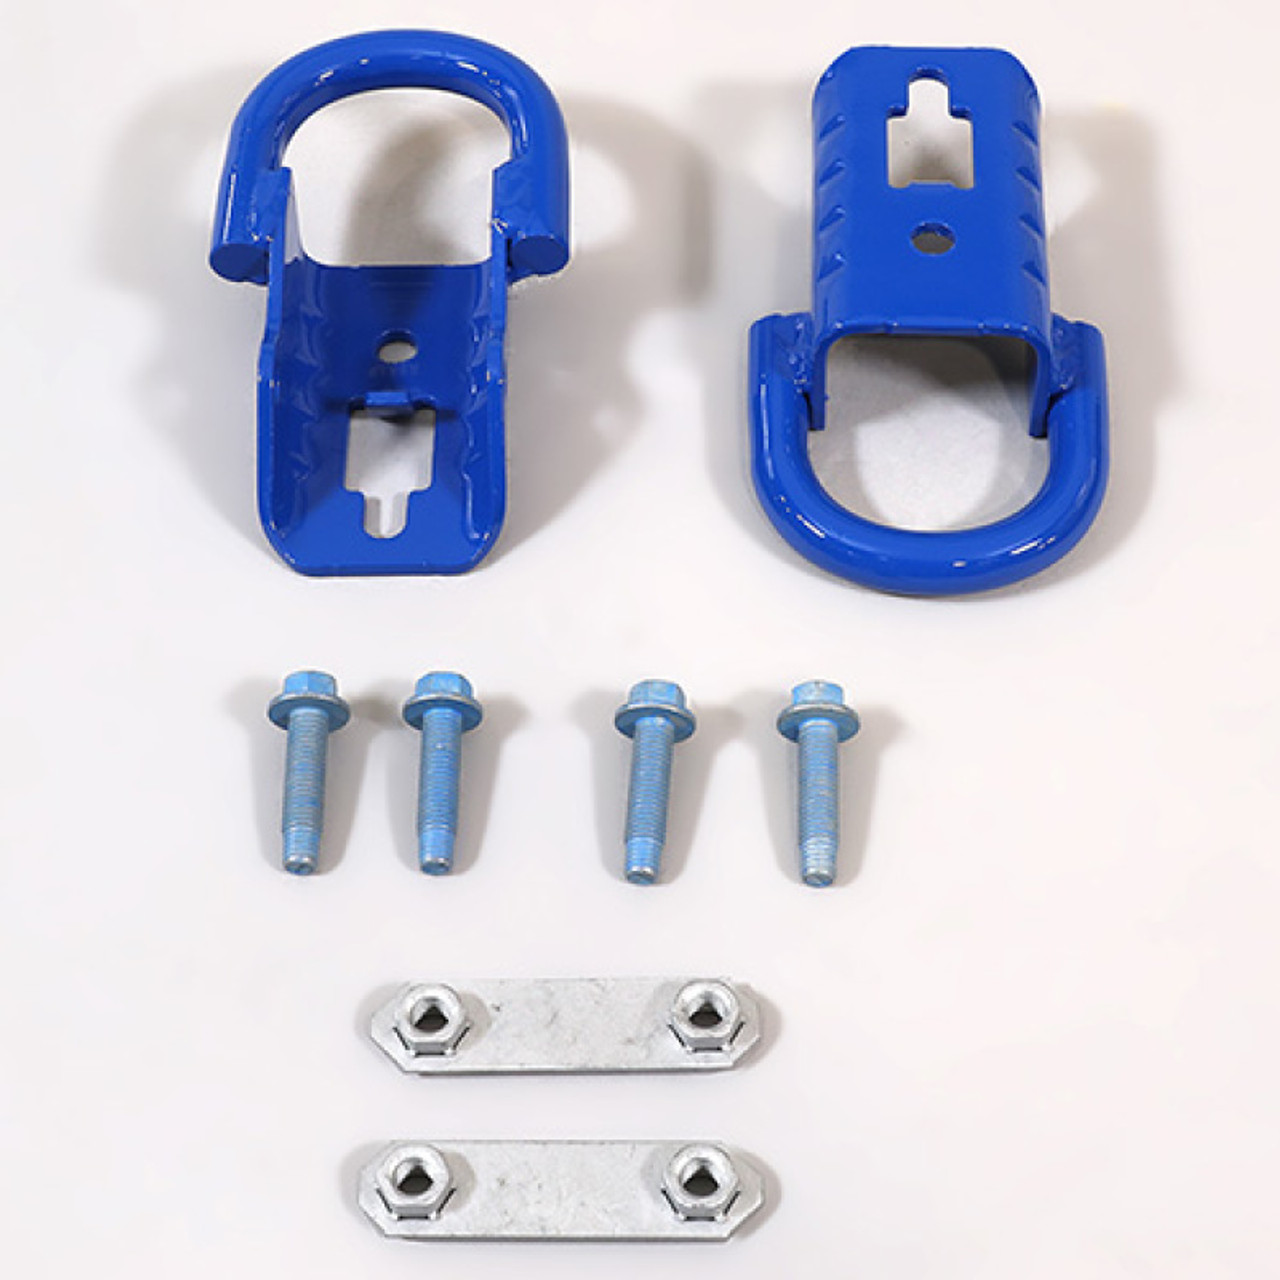 Ford Racing 2019 Ford Ranger Front Tow Hooks - Pair - Blue